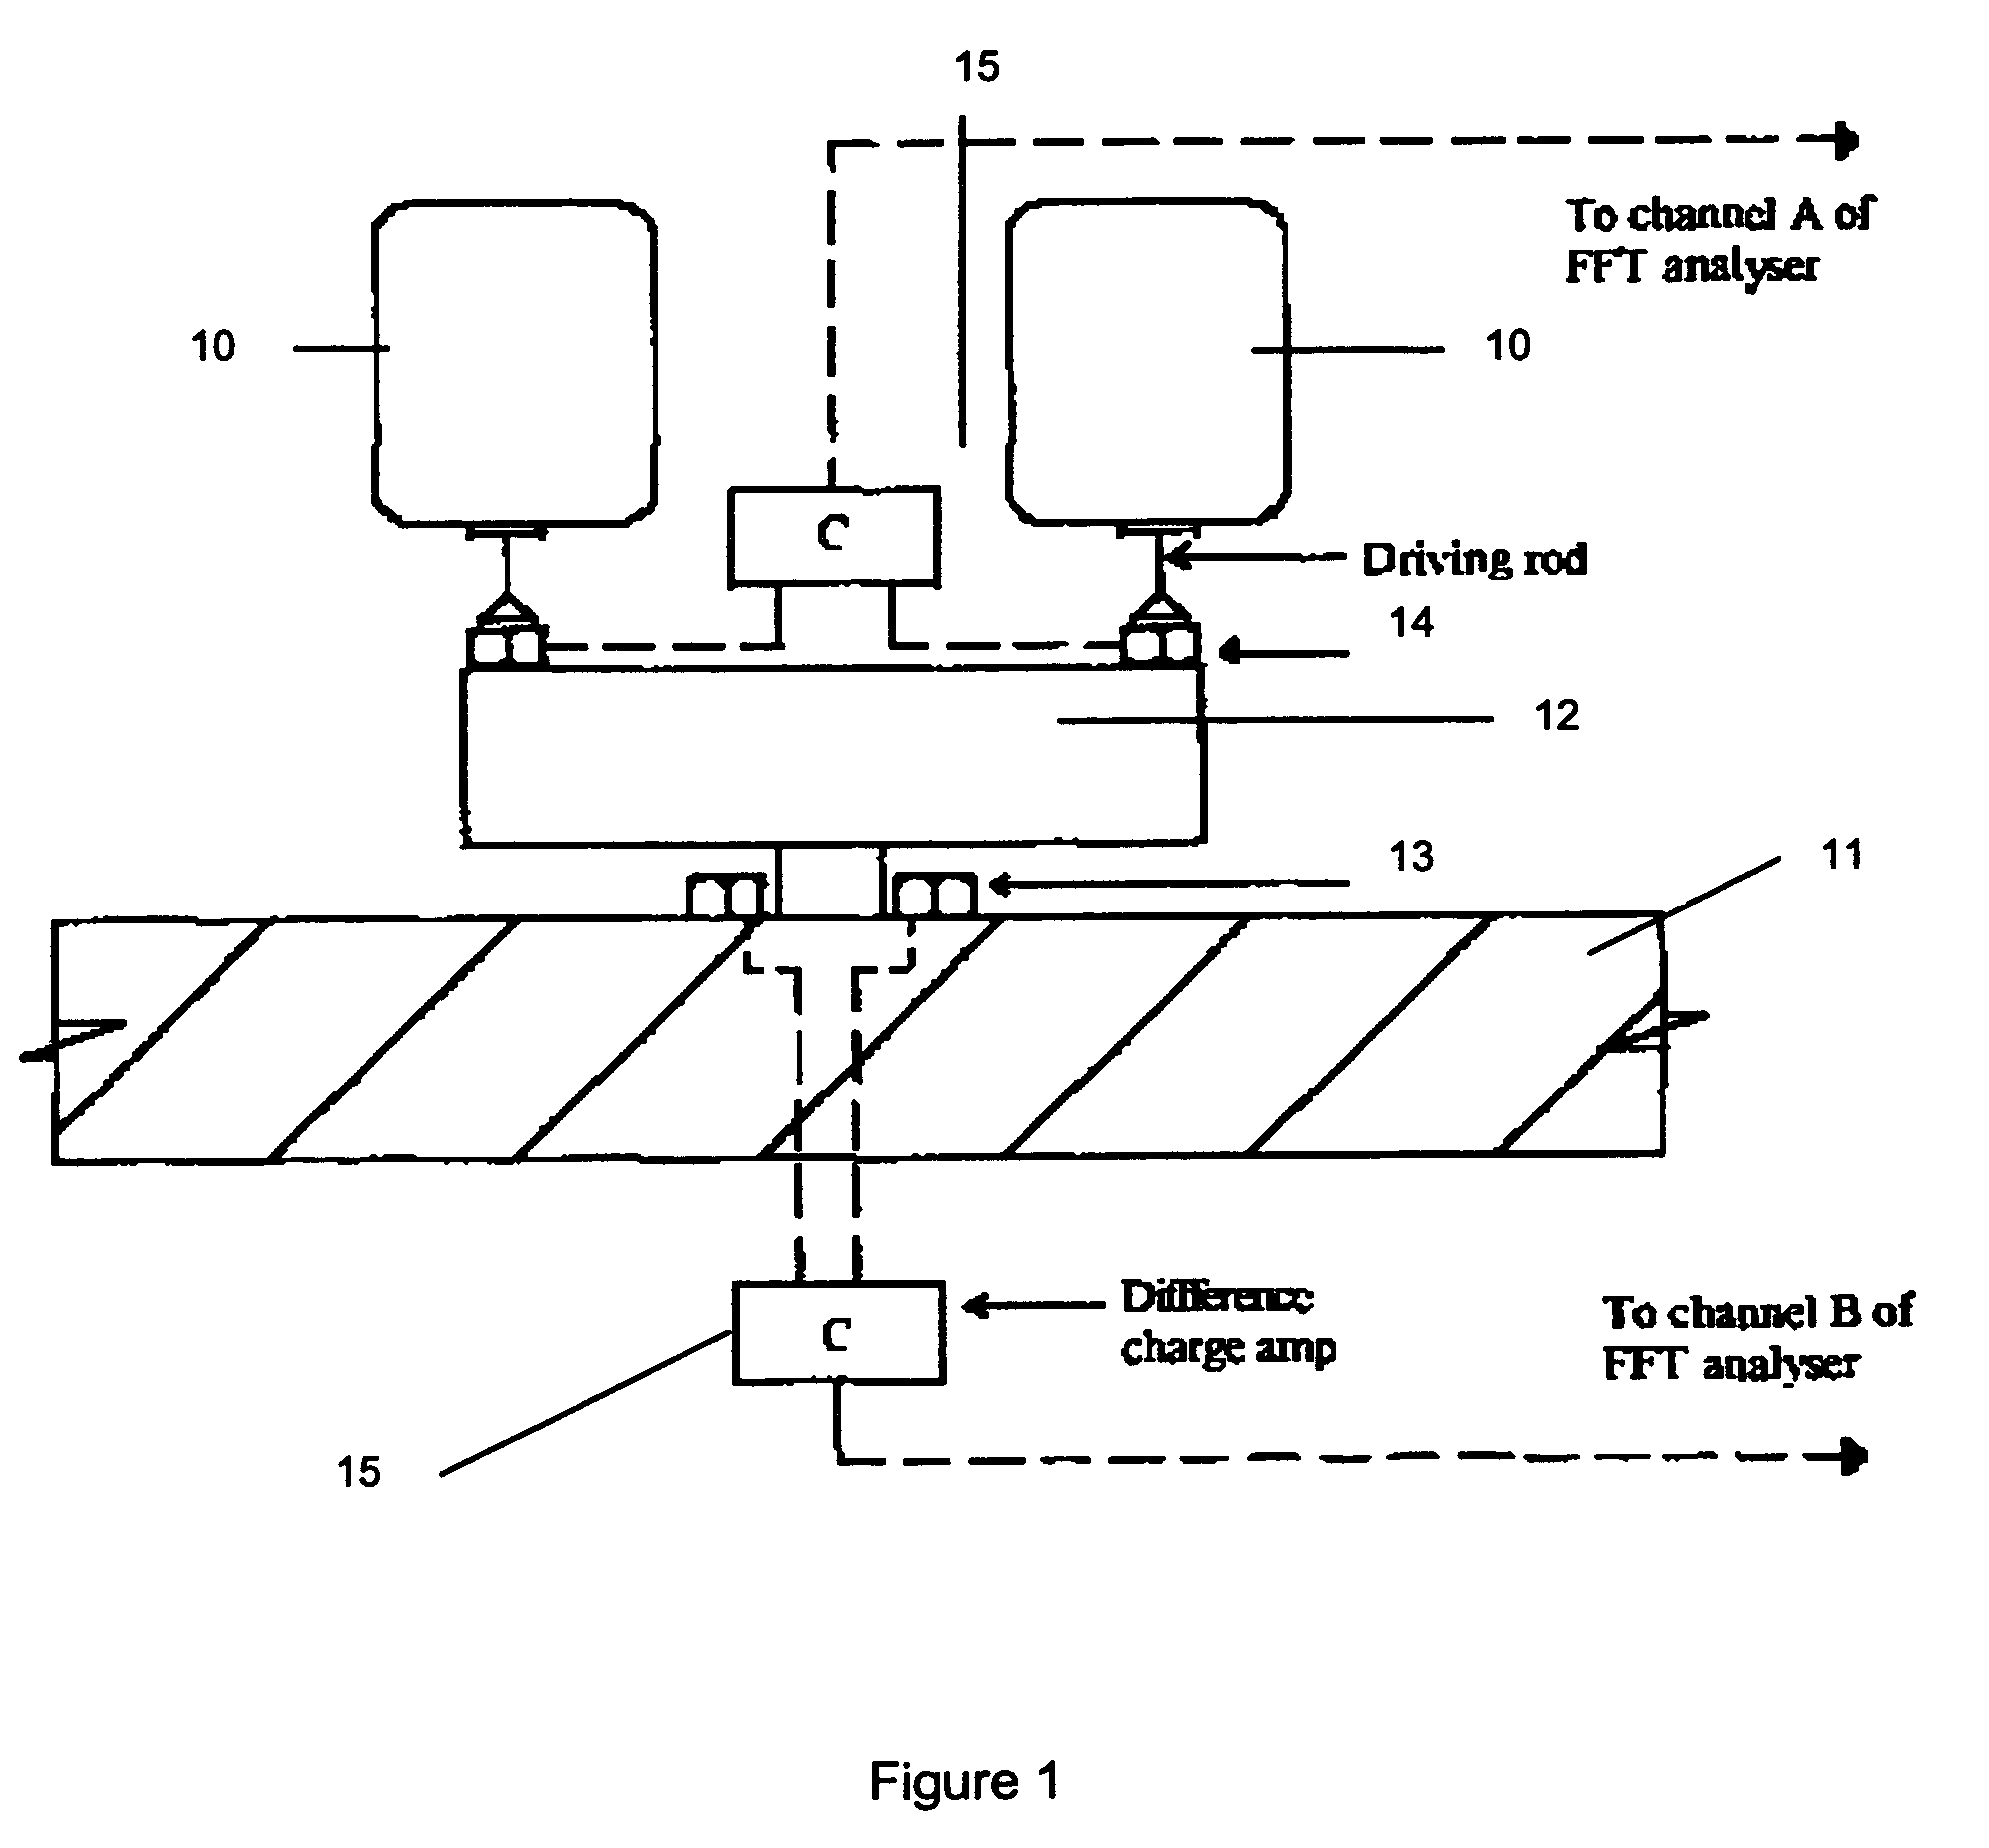 Method and transducers for dynamic testing of structures and materials